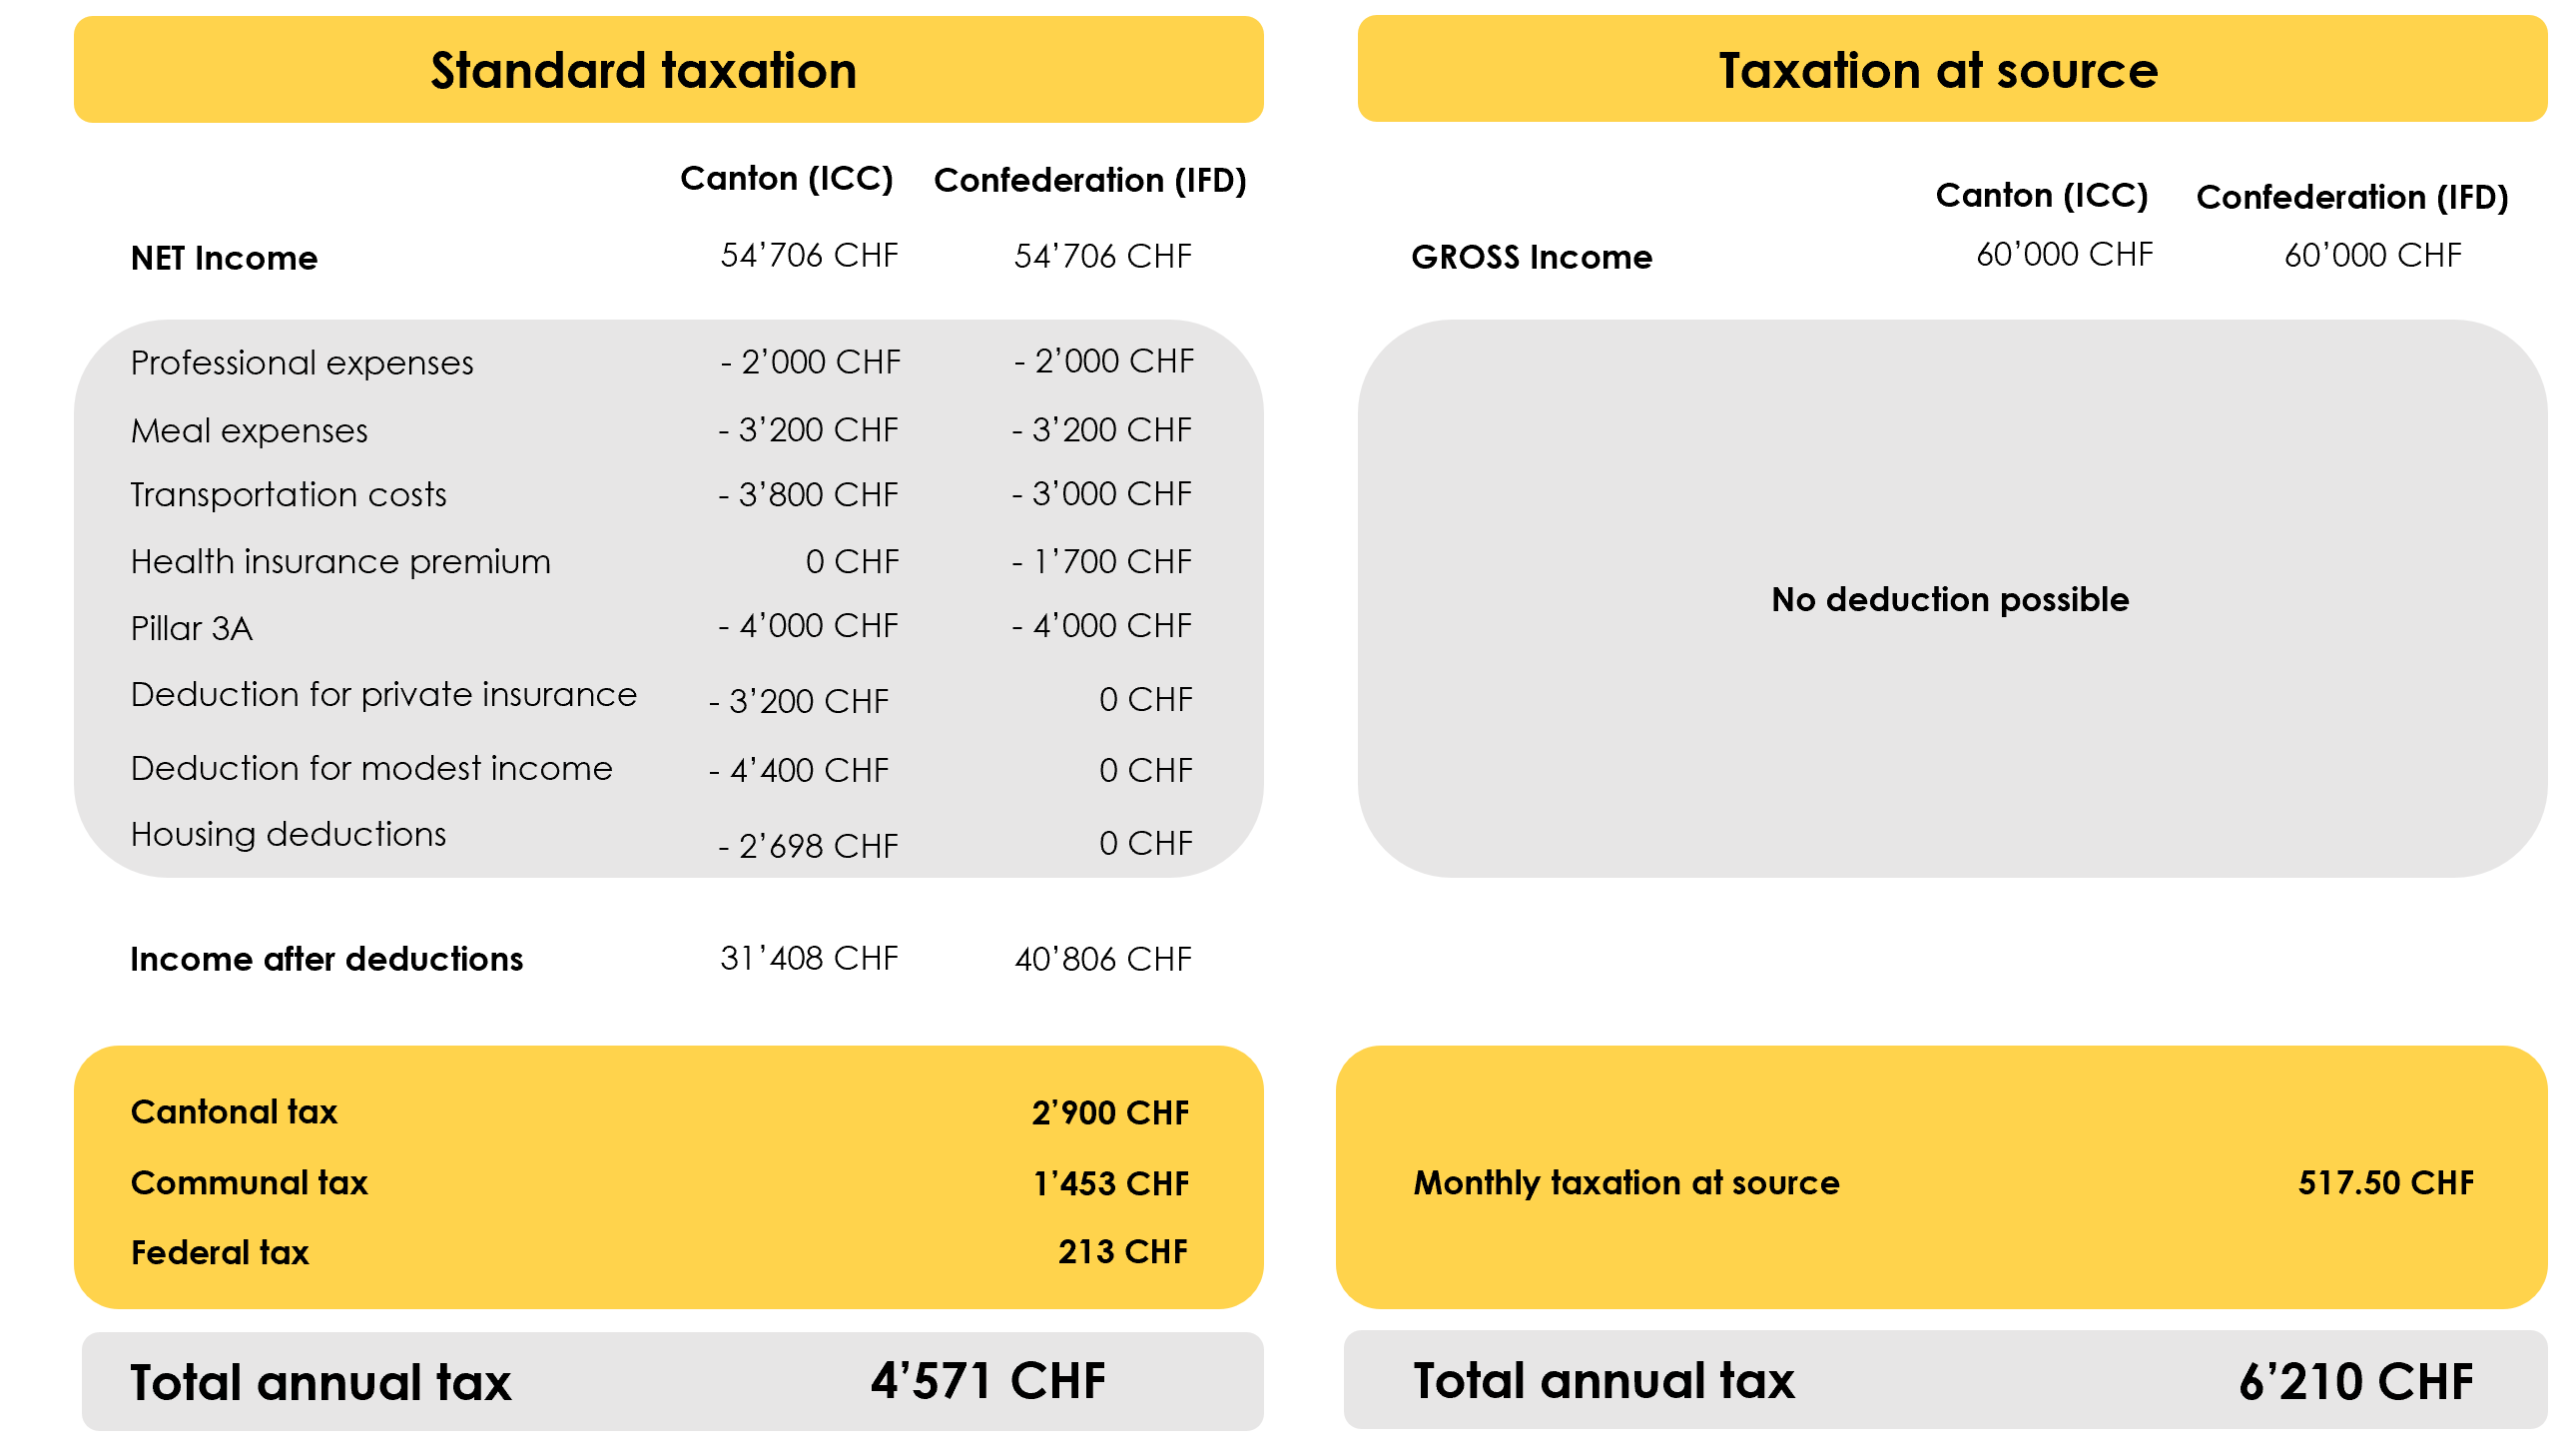 Example 1: Comparison between ordinary and withholding tax 